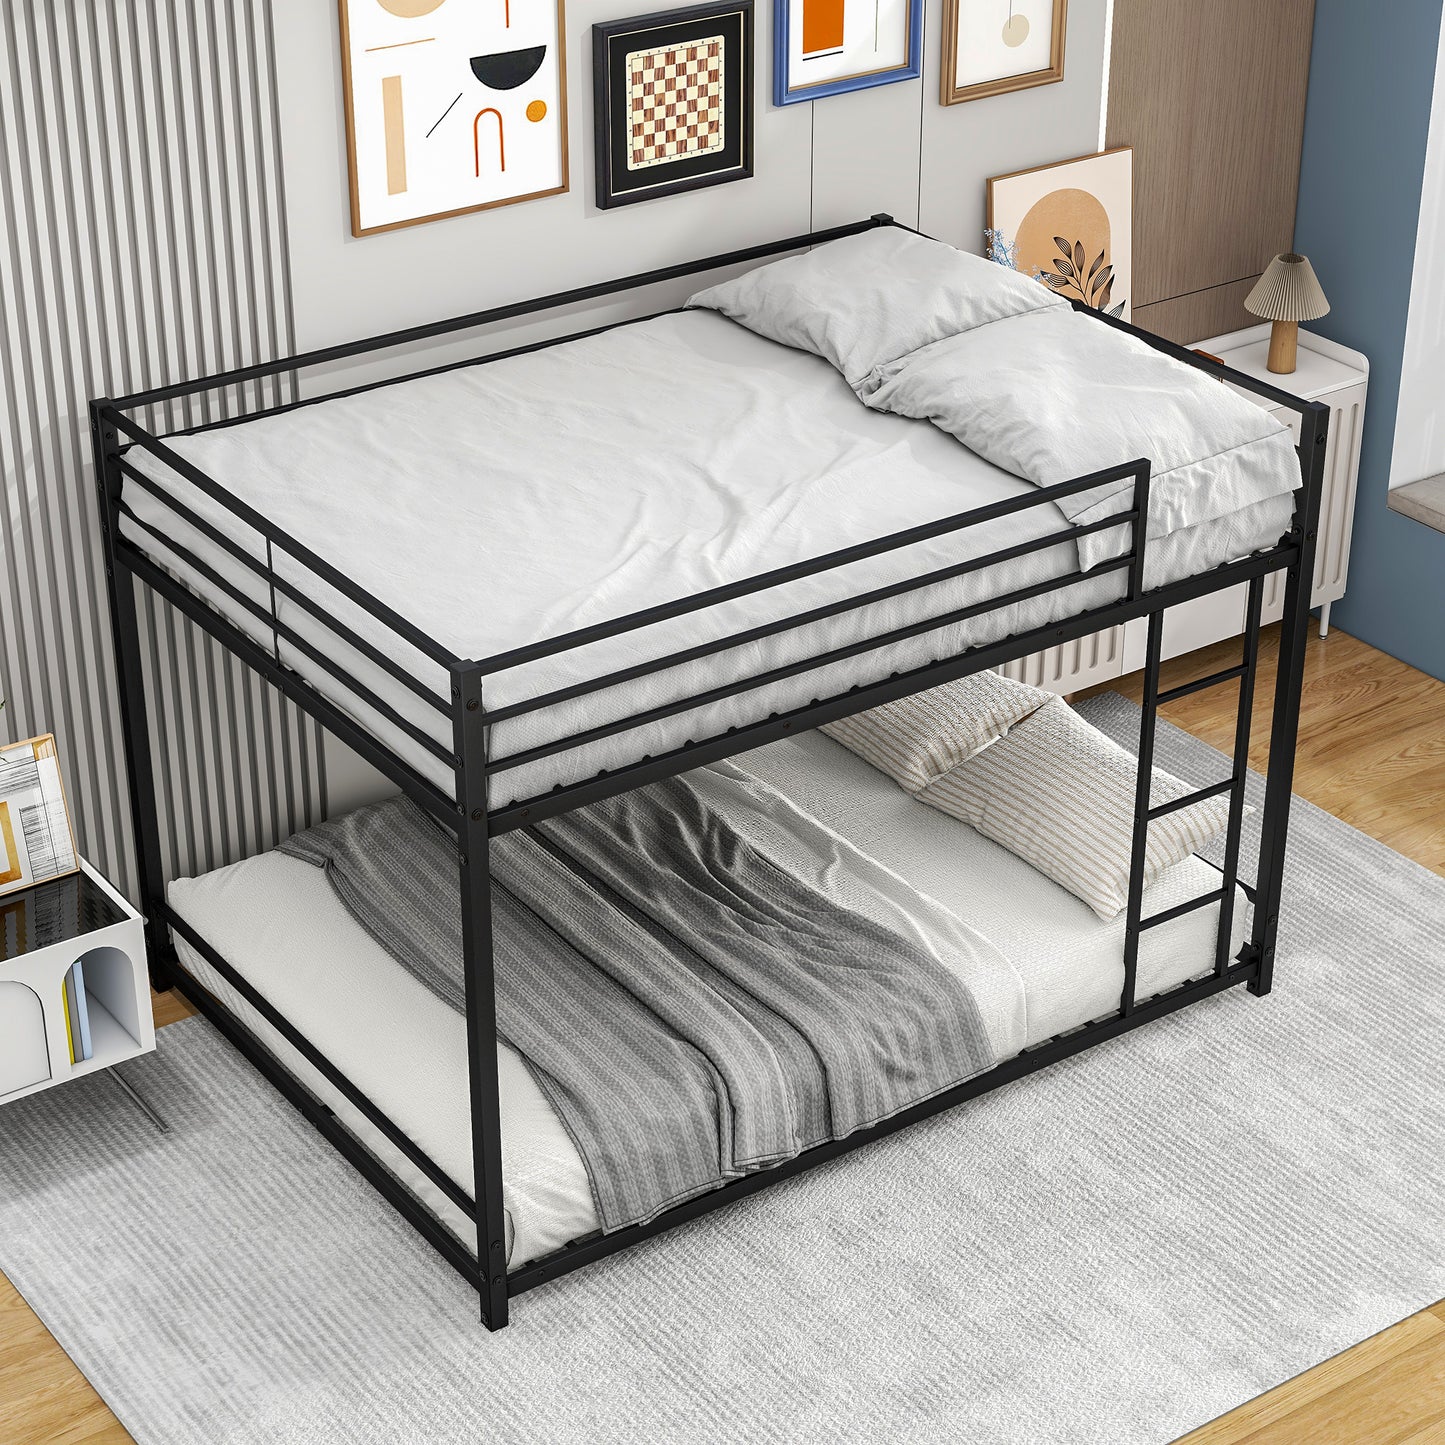 Metal Bunk Bed Full Over Full, Bunk Bed Frame with Safety Guard Rails, Heavy Duty Space-Saving Design, Easy Assembly Black